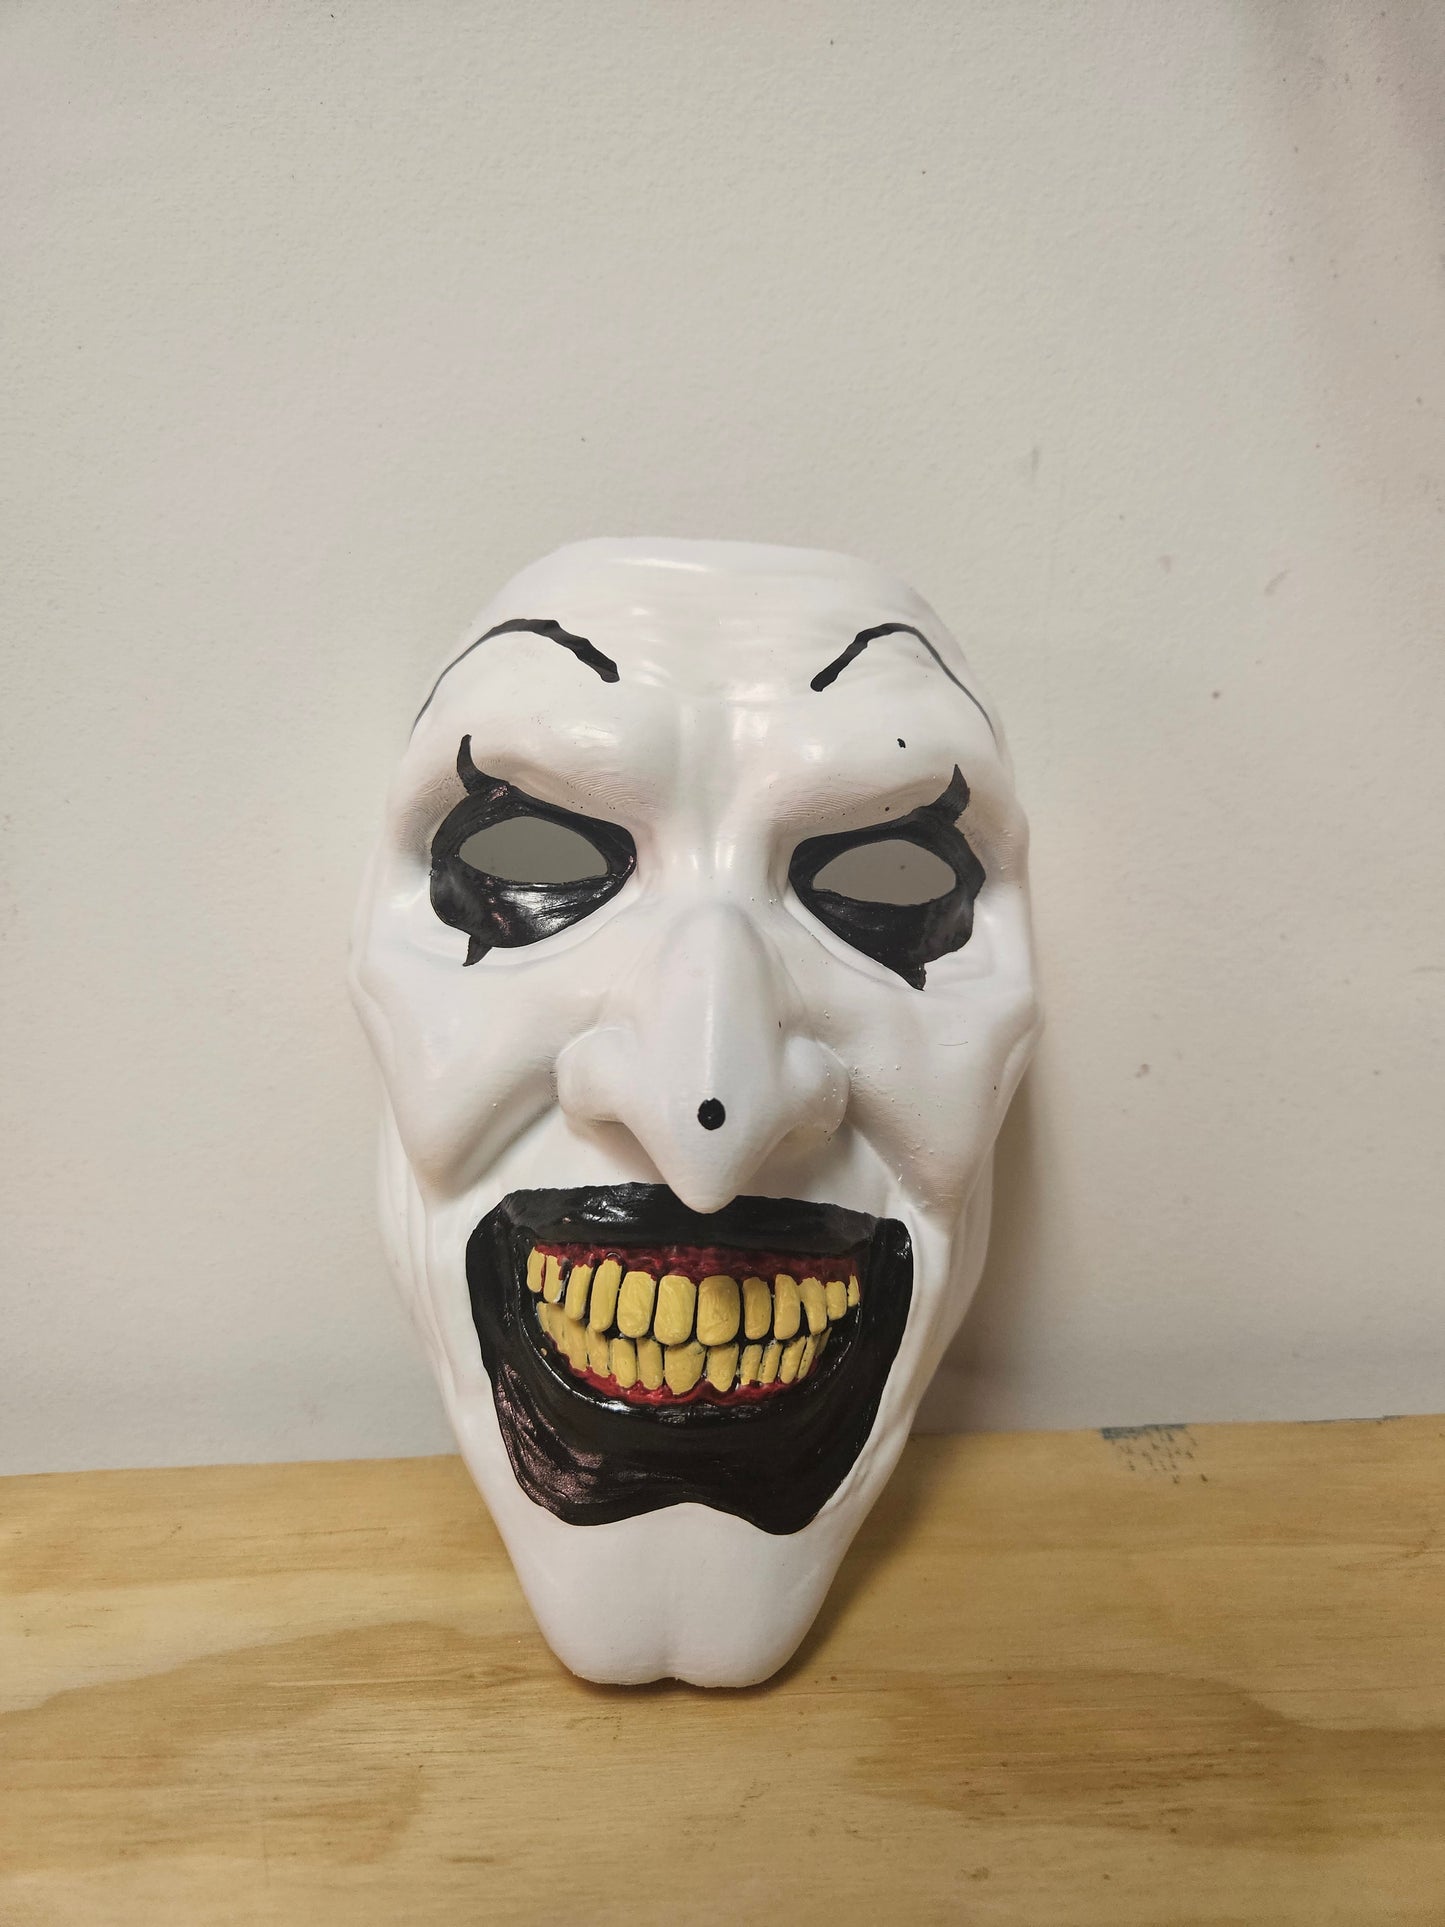 Art the clown from the Terrifier movie mask is 3D printed, painted and accented in realistic FAKE blood paint or without. Available now from Aviator 3D Printing .com